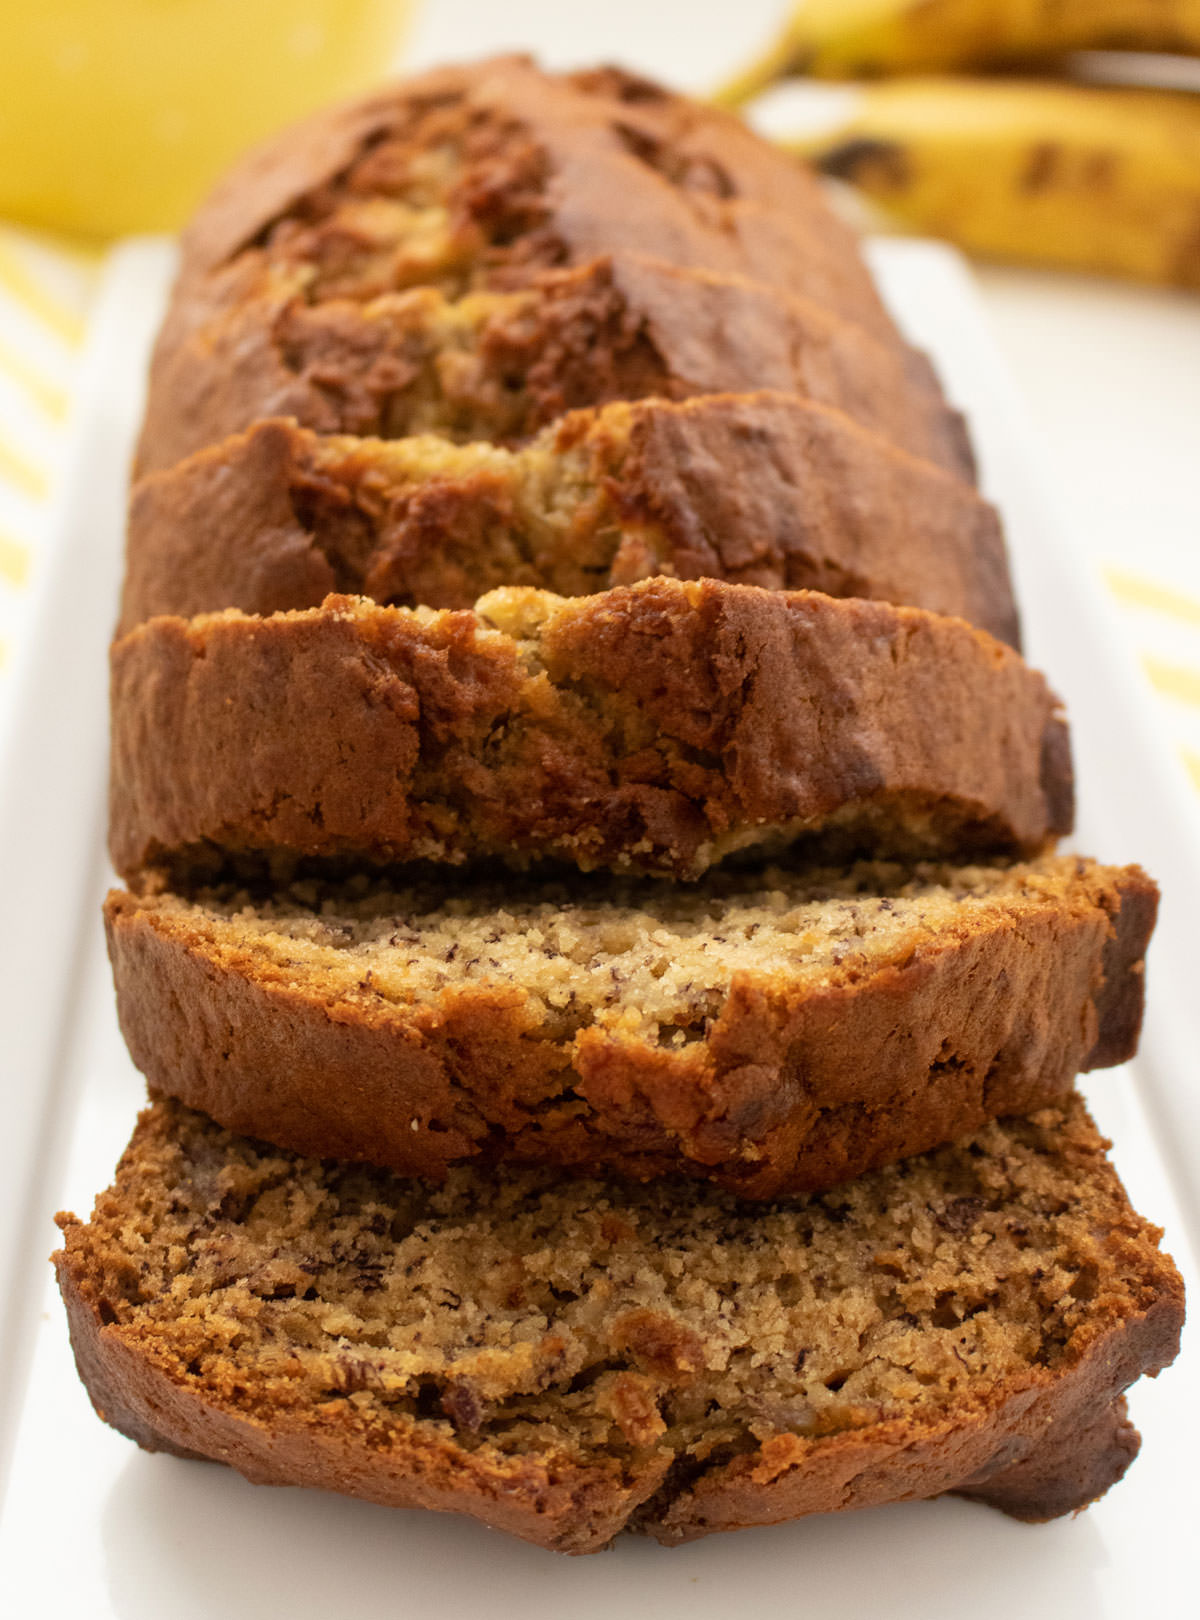 Closeup on a loaf of homemade Banana Bread, sliced into pieces, arranged on a serving platter.